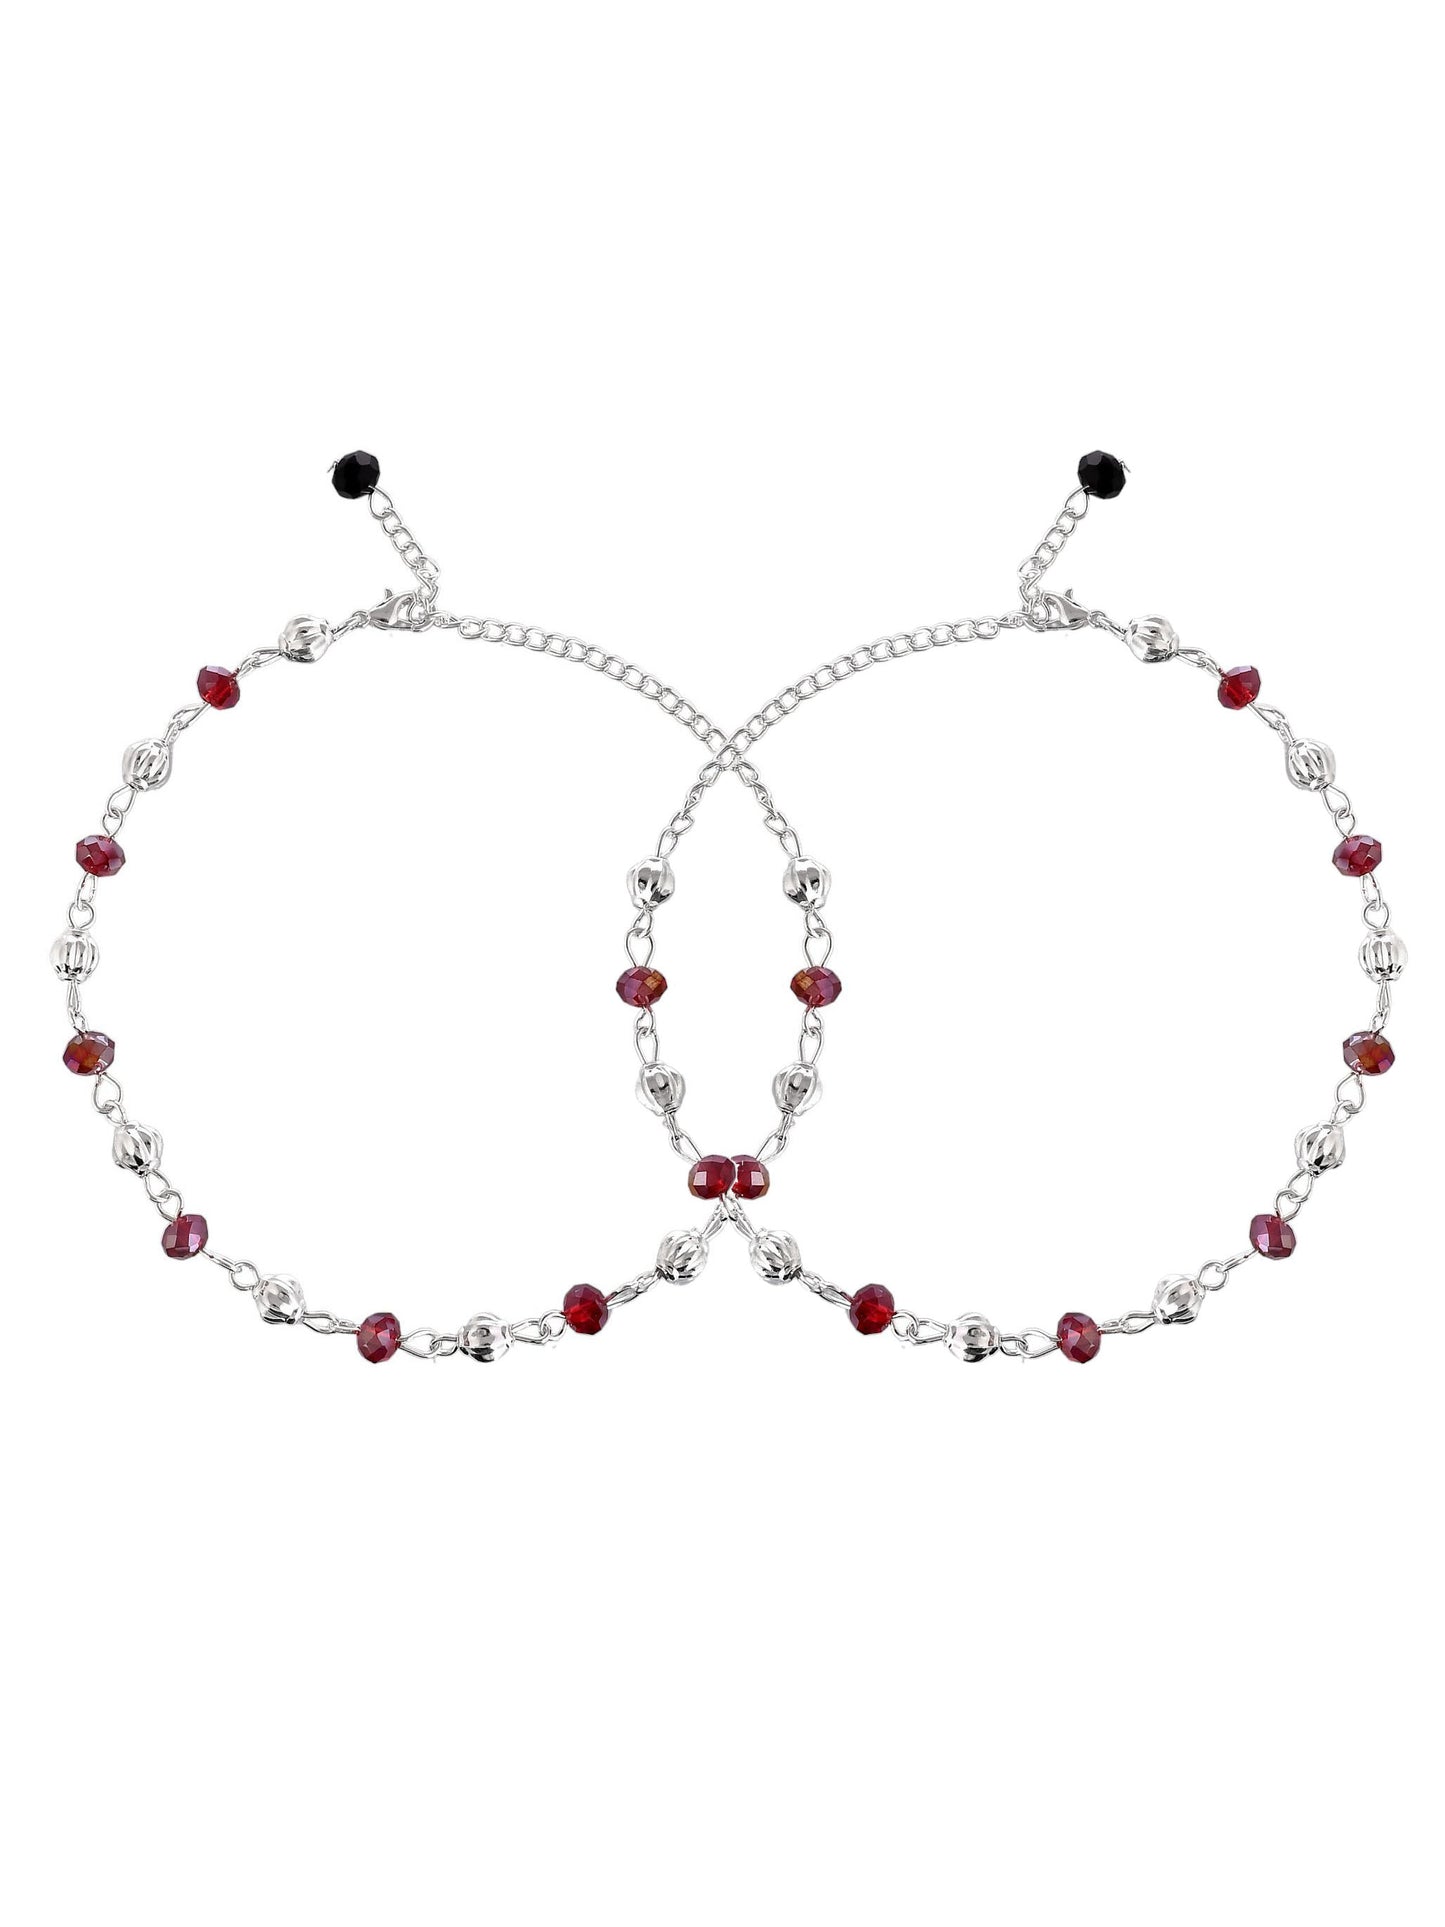 Stylish beads-studded silver anklet for girls